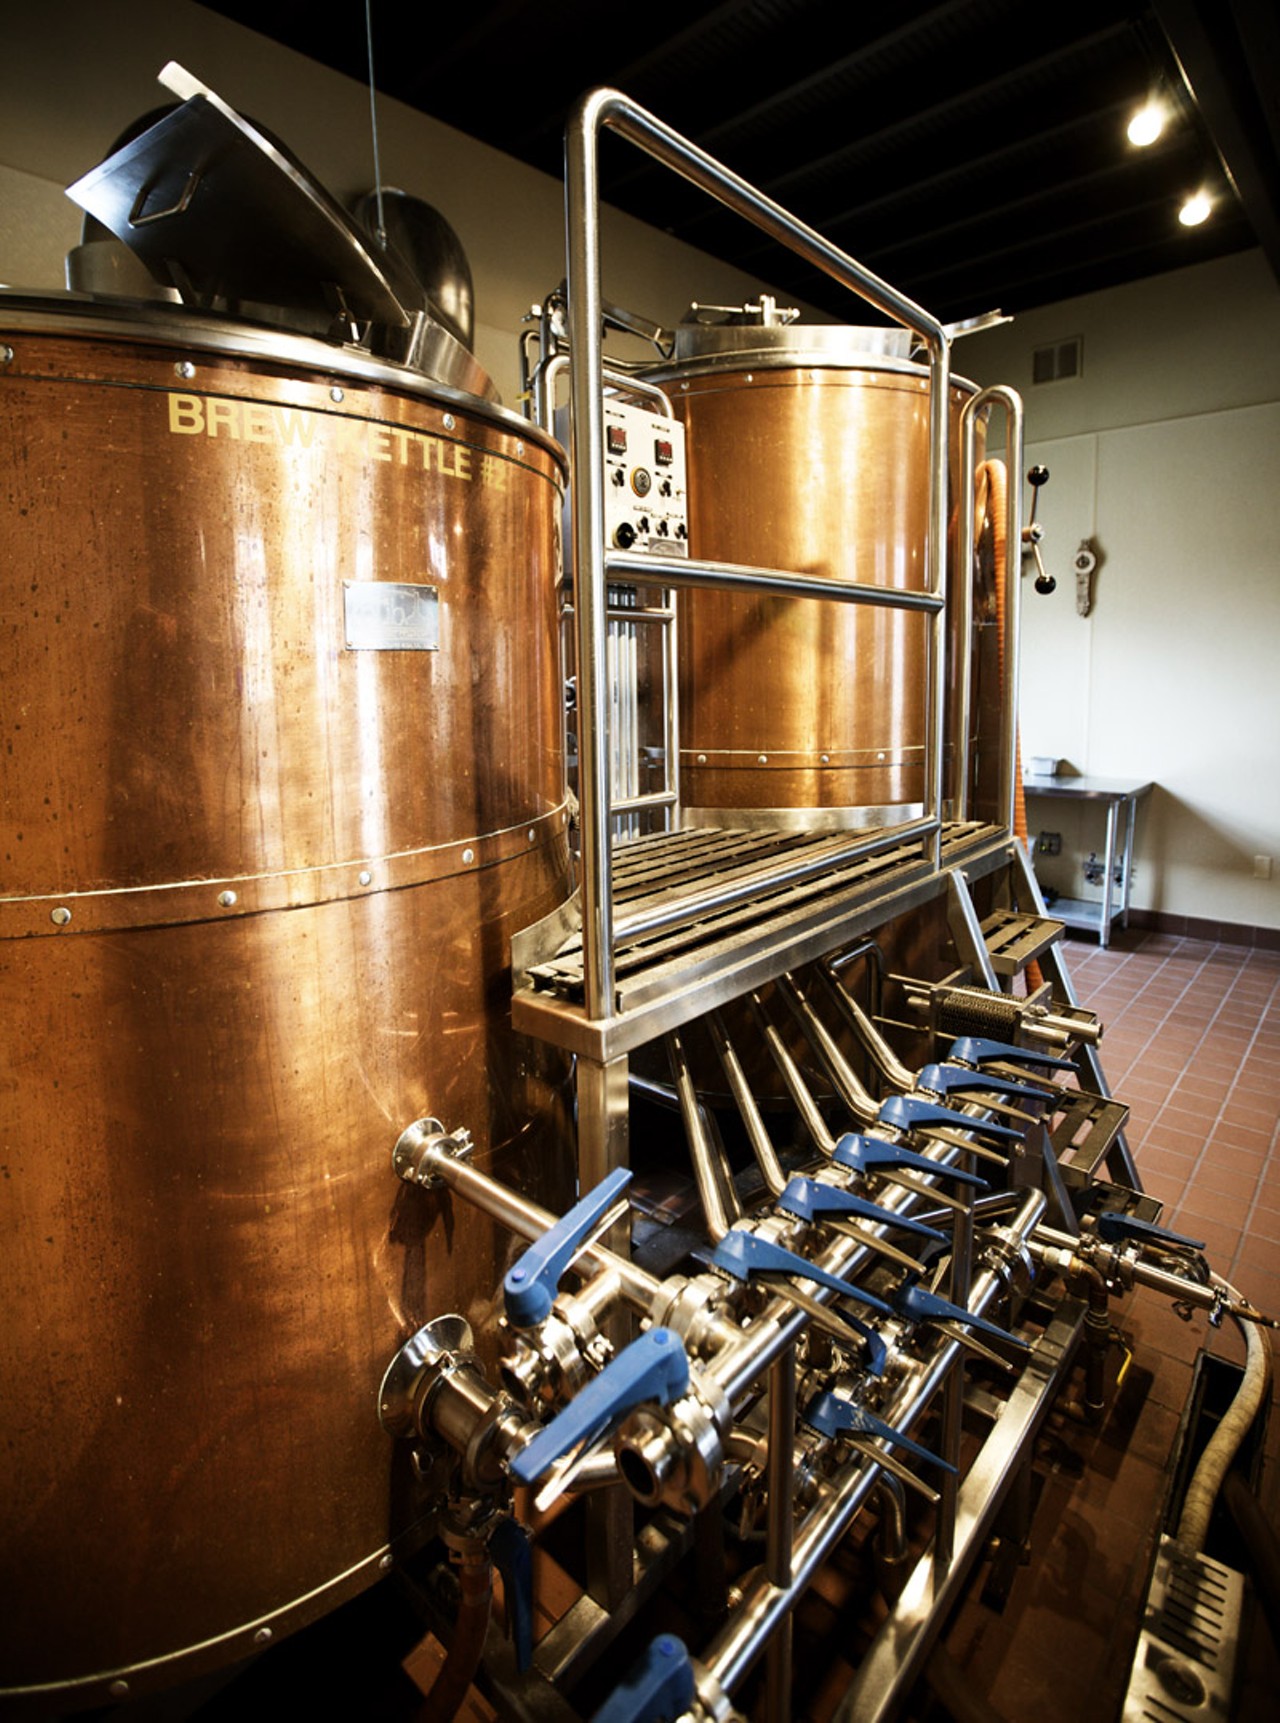 A look inside the microbrewery.